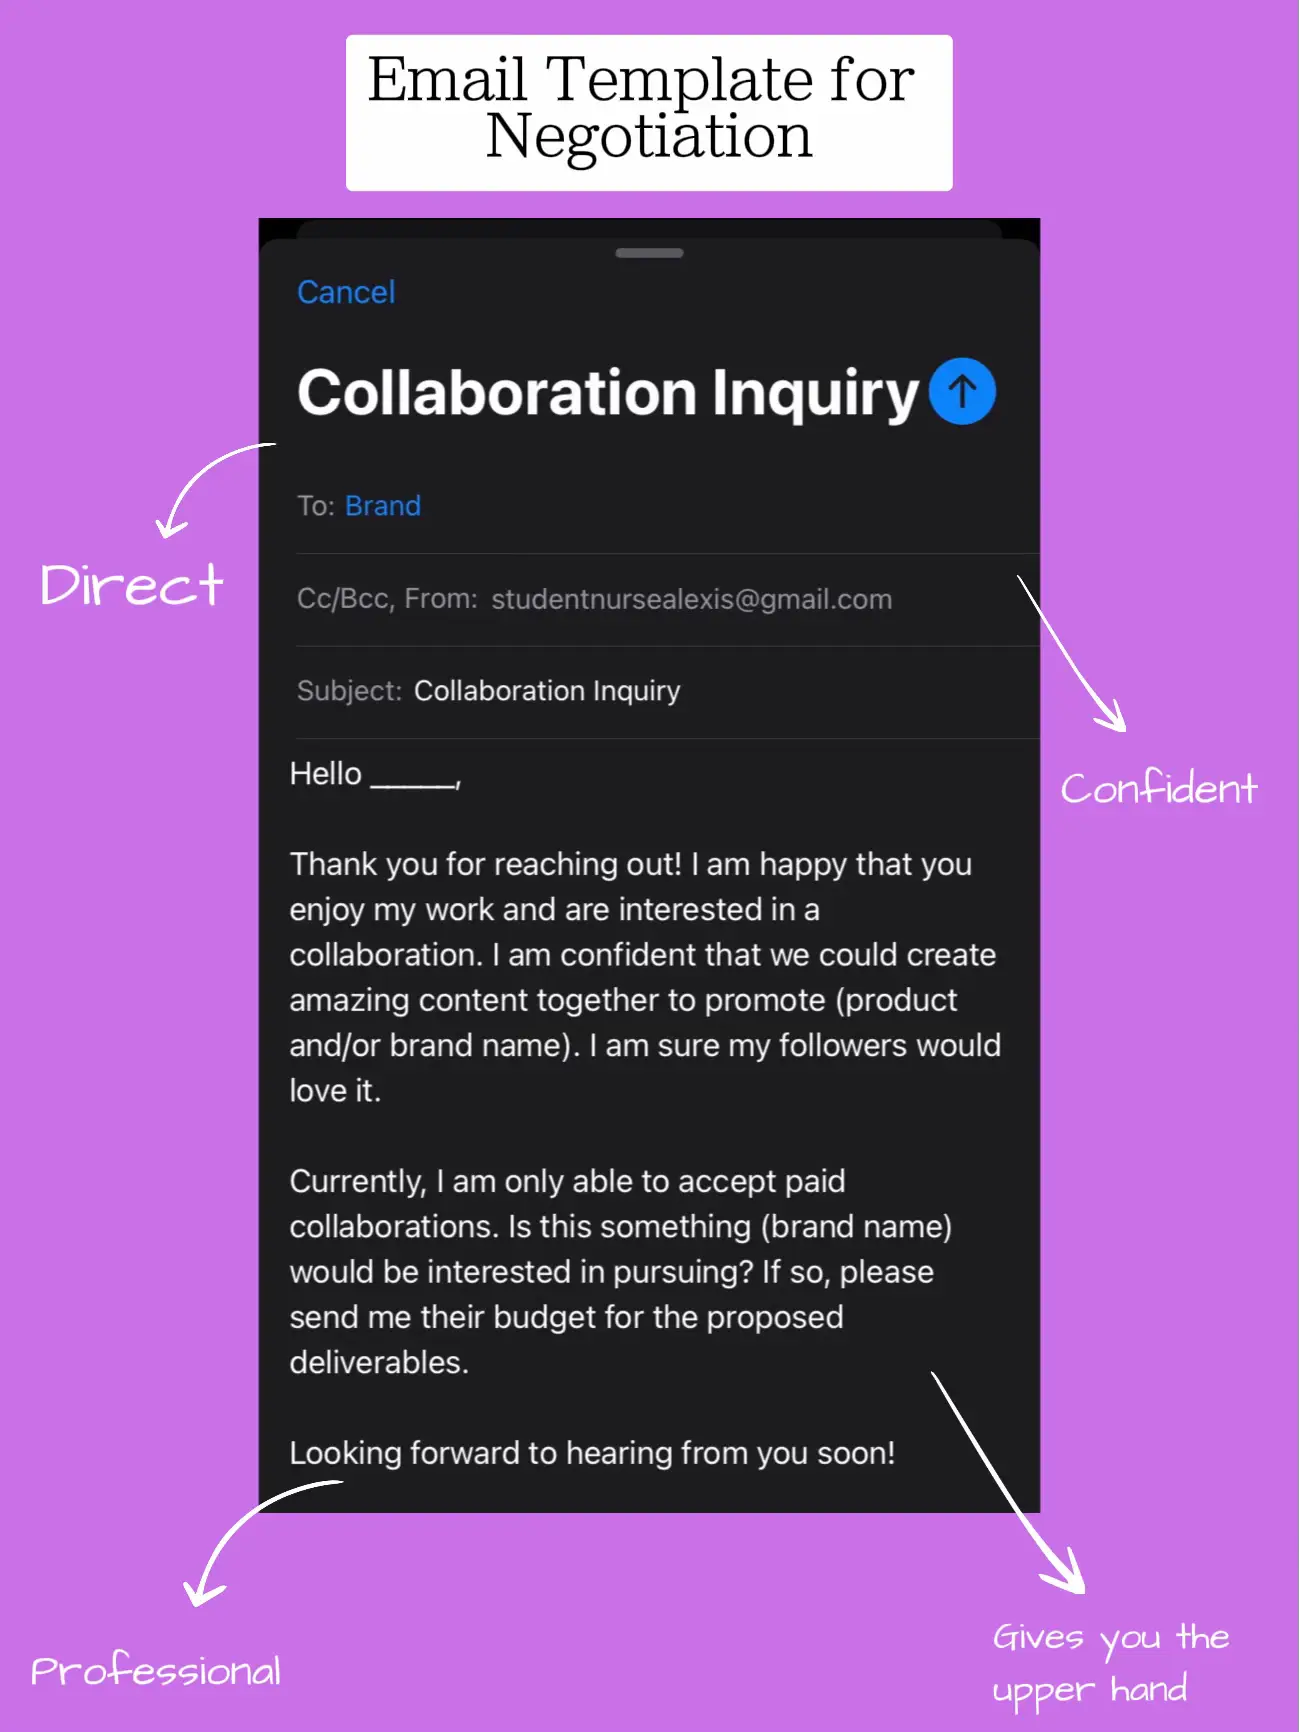 paid Collaborations